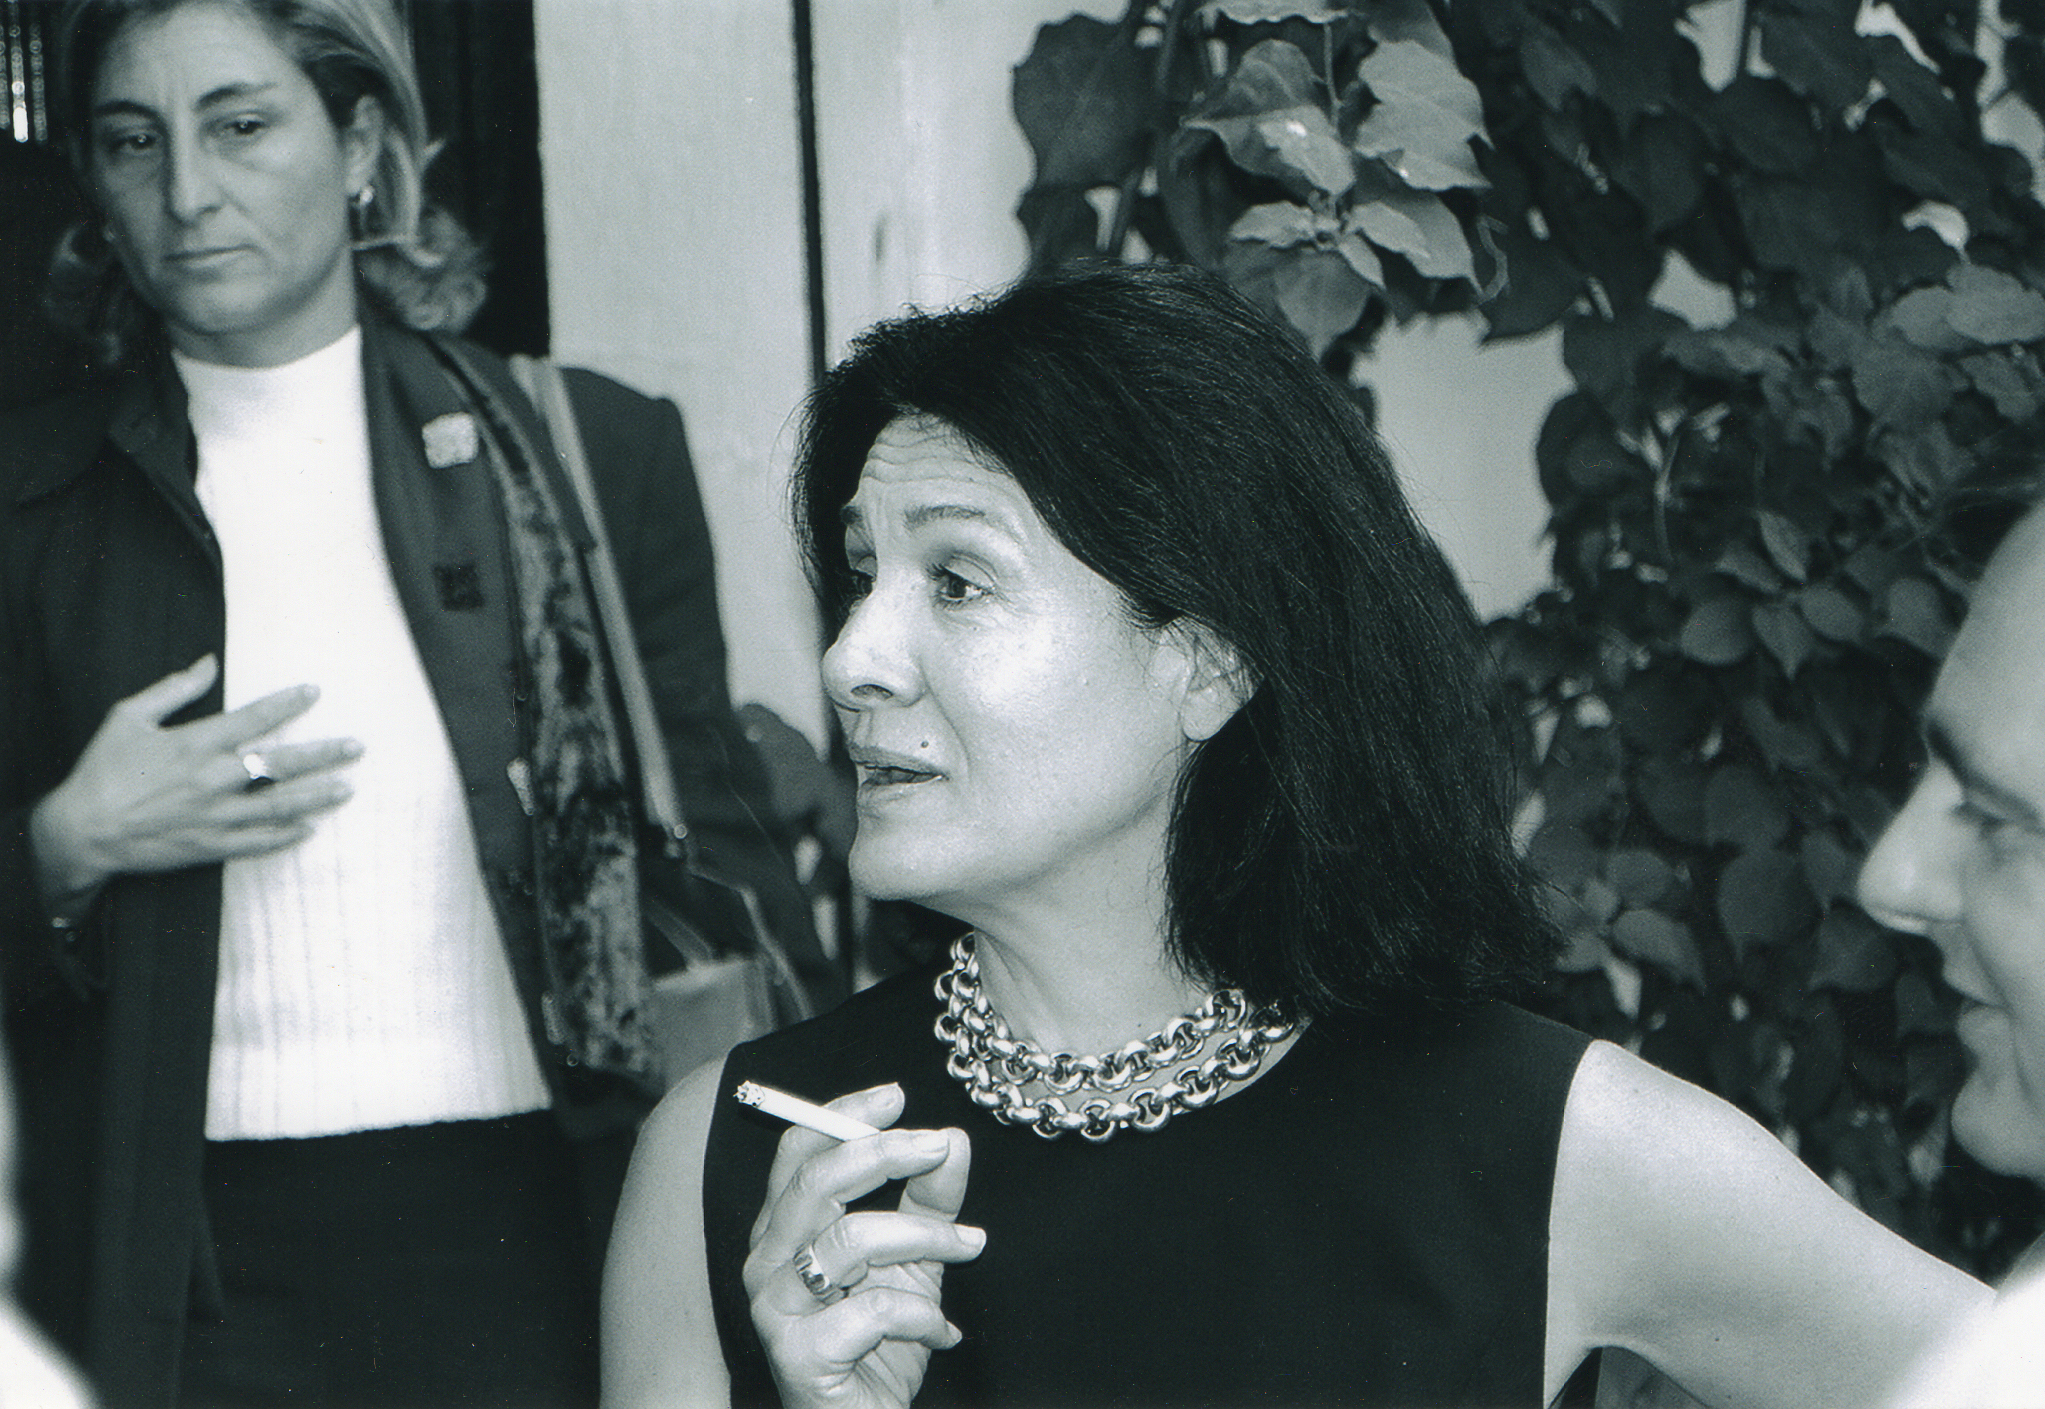 What is Paloma Picasso famous for?